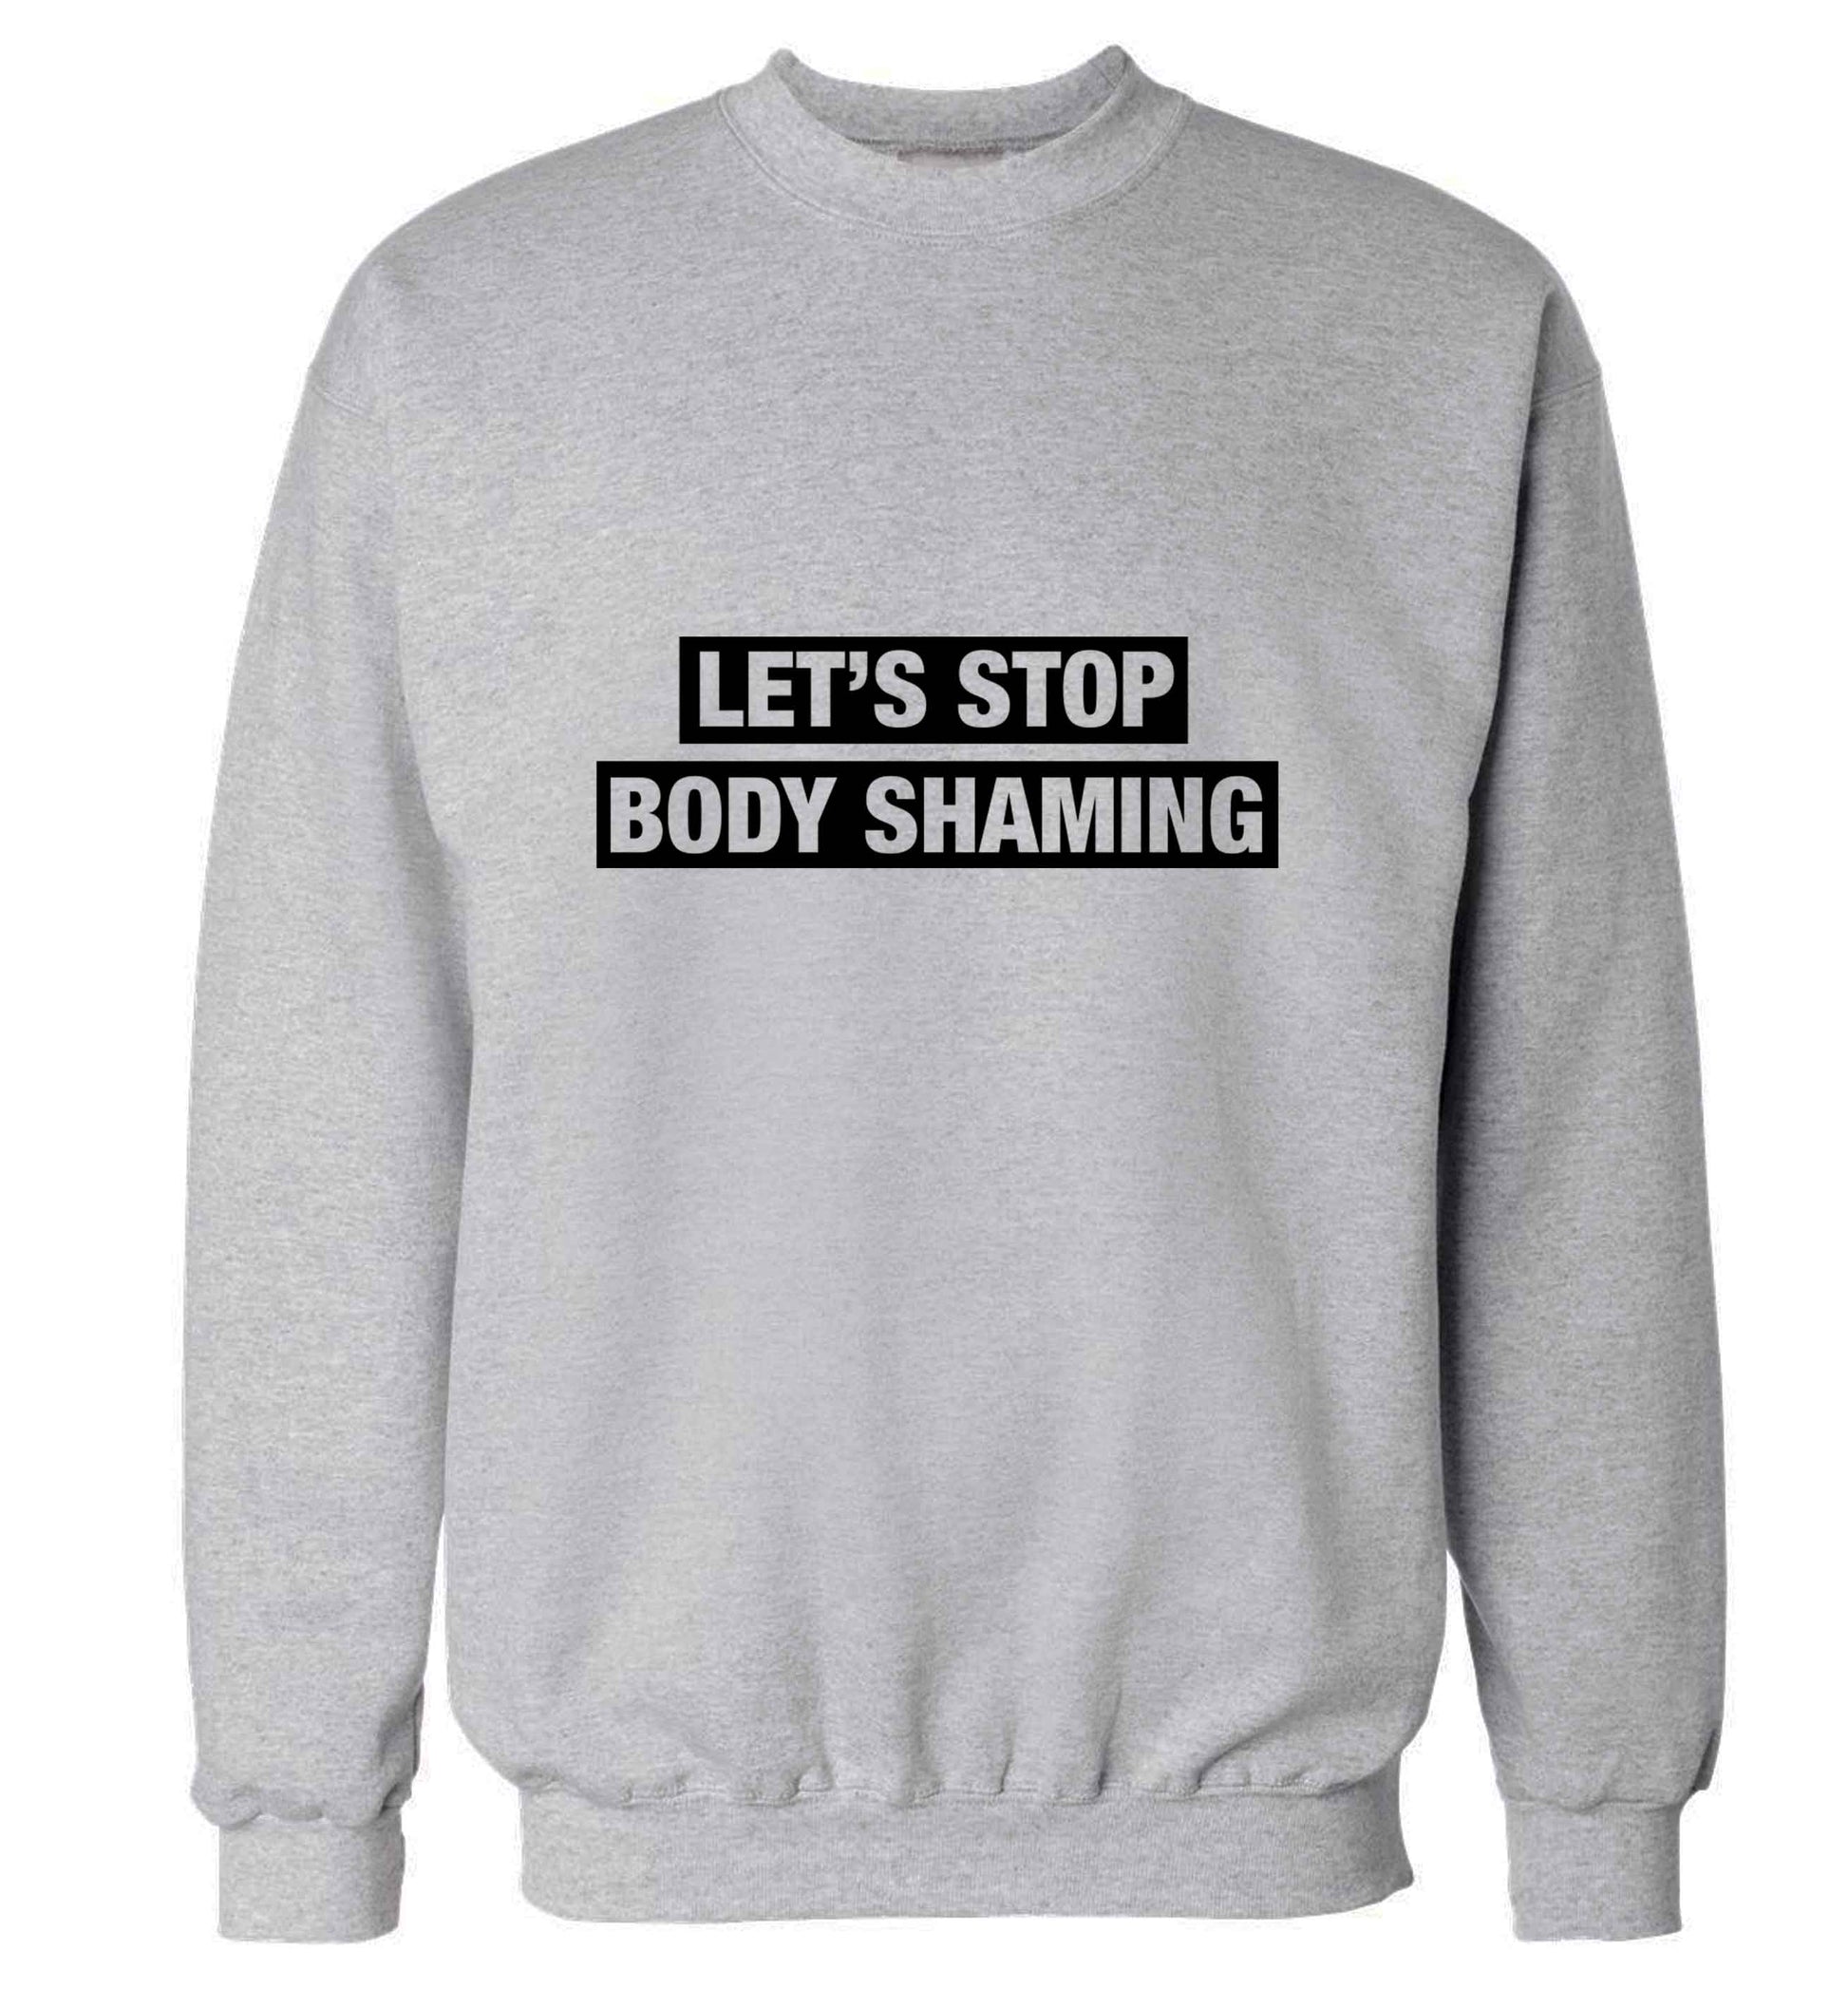 Let's stop body shaming adult's unisex grey sweater 2XL